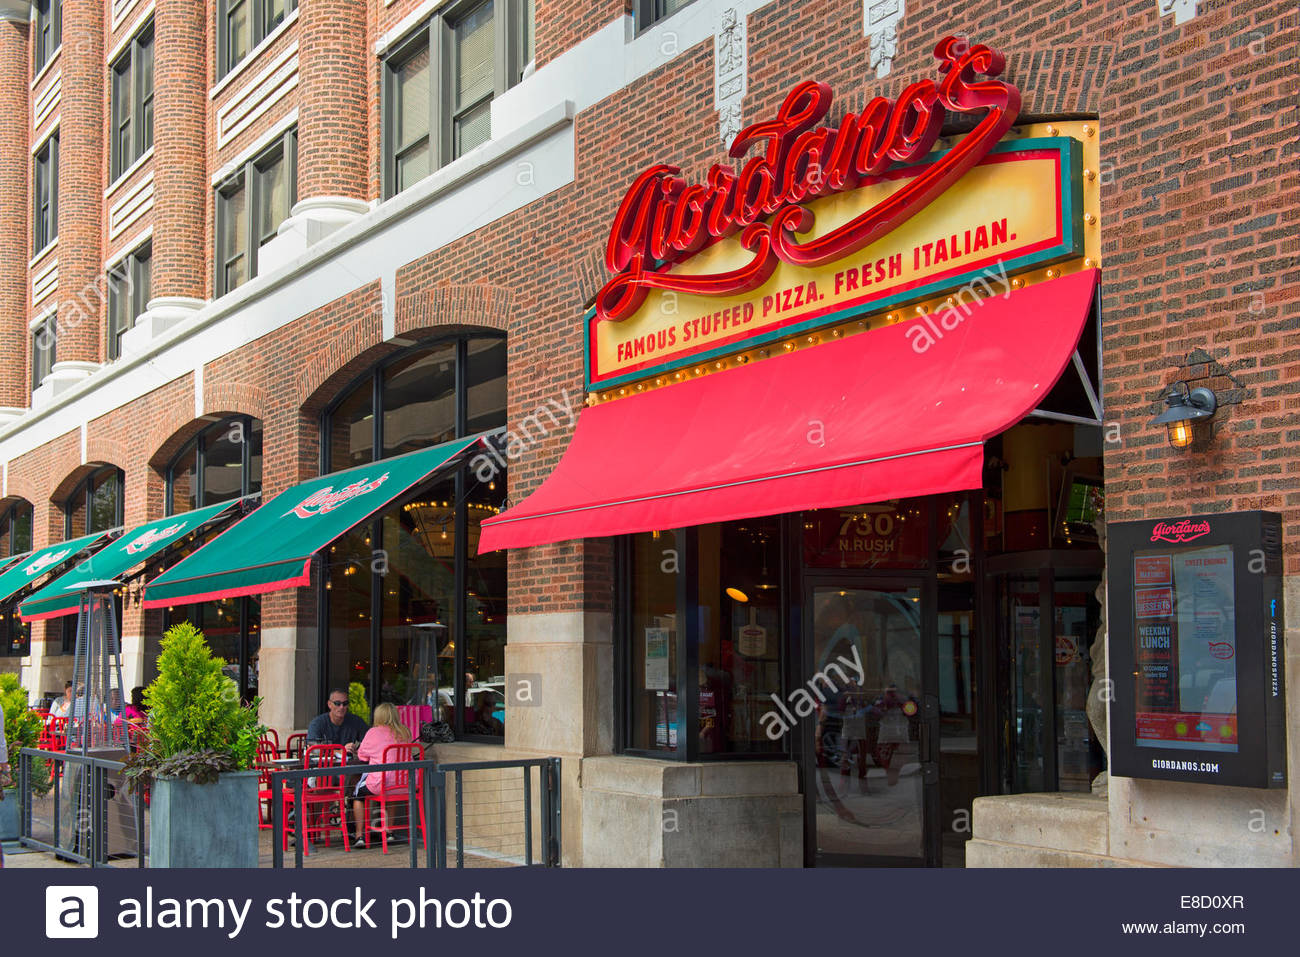 How To Check Your Giordano's Gift Card Balance